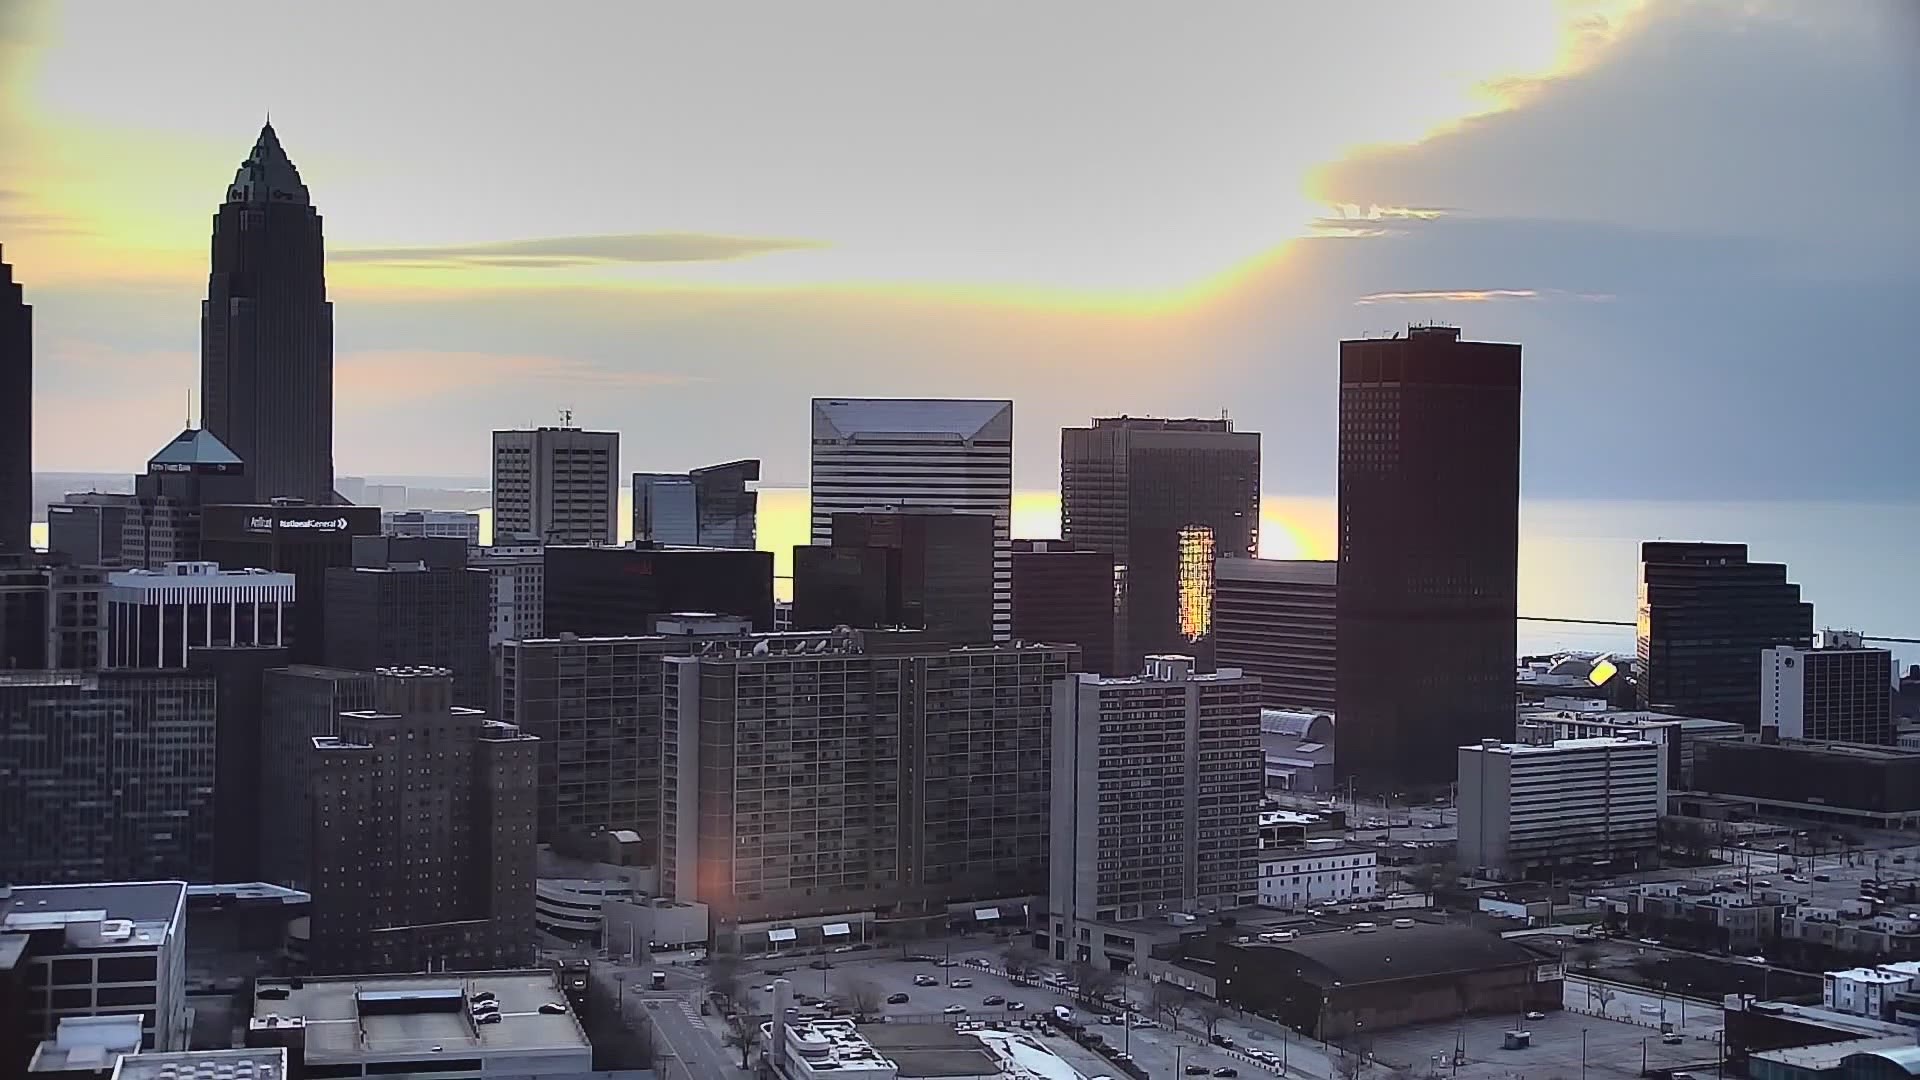 We call it a "heavenly" sunset weather time-lapse tonight in the CLE from the Channel 3 CSU Skycam for April 16, 2019. #3weather